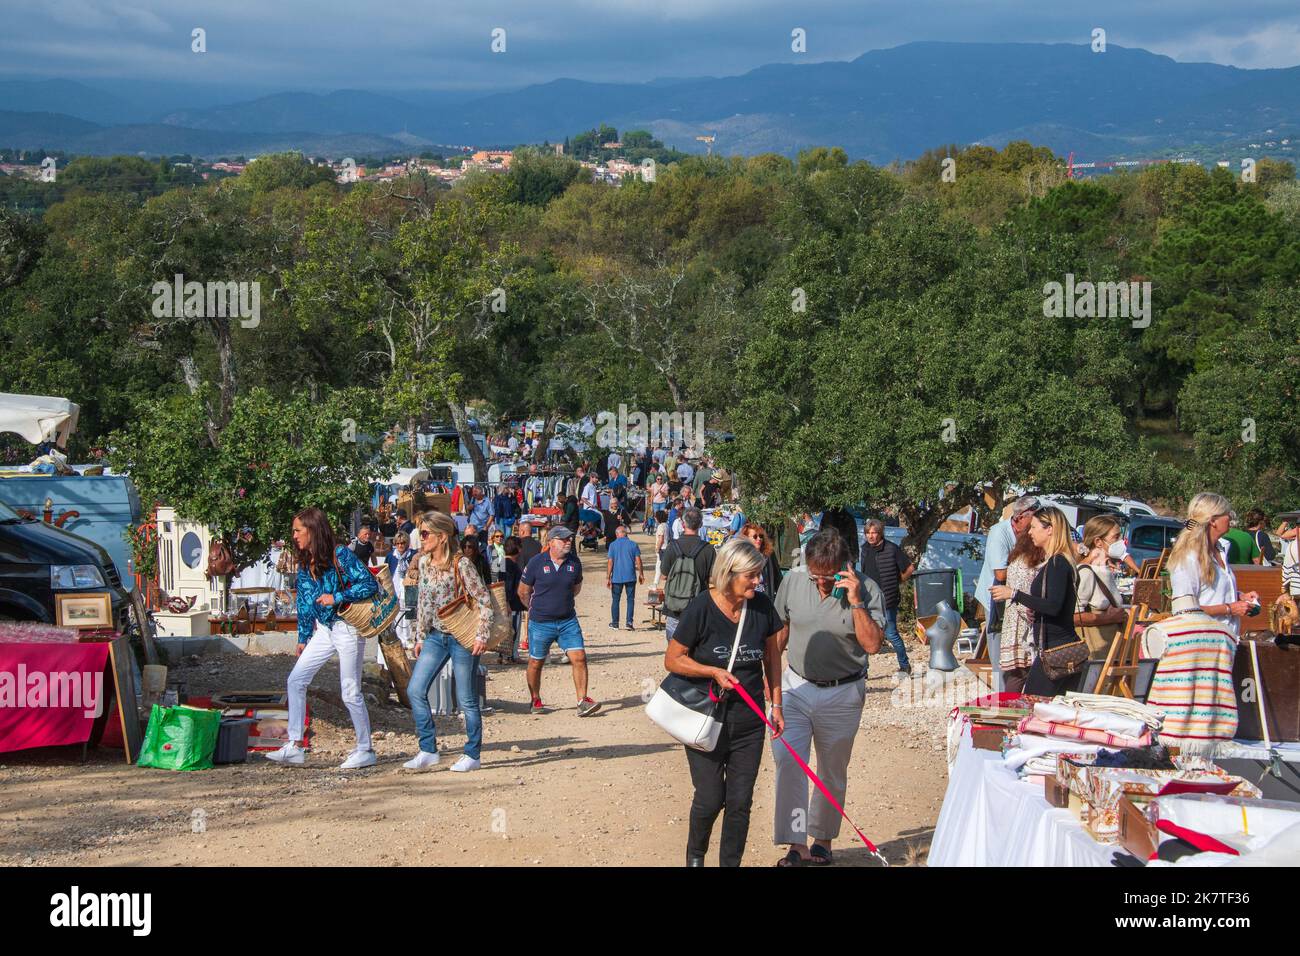 People browsing at Jas de Robert Antiques Market near Cogolin, in the Var department of the Provence-Alpes-Côte d'Azur region in Southern France. Stock Photo